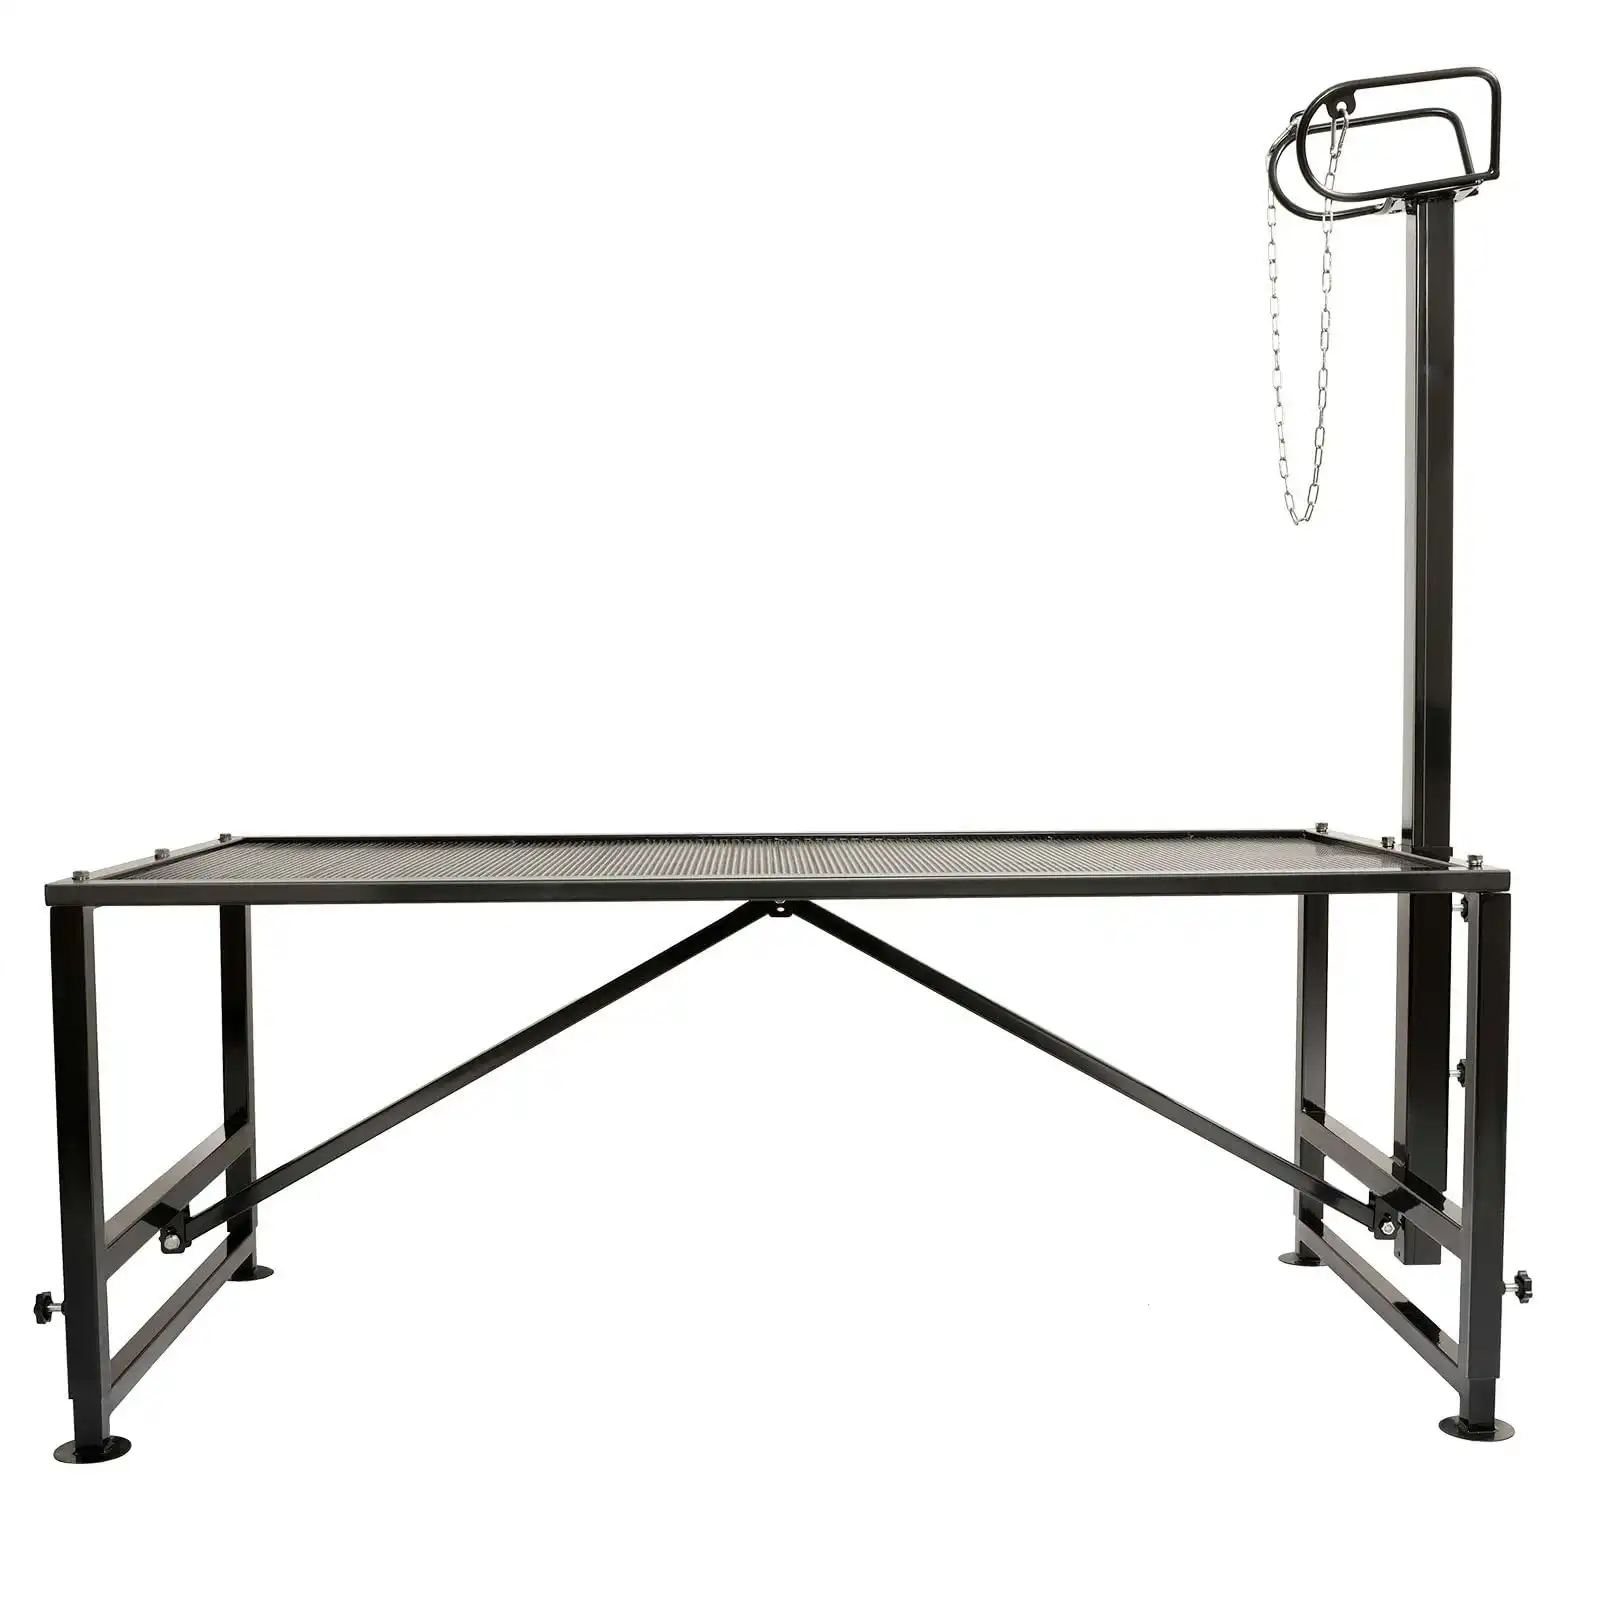 Livestock Trimming Stand